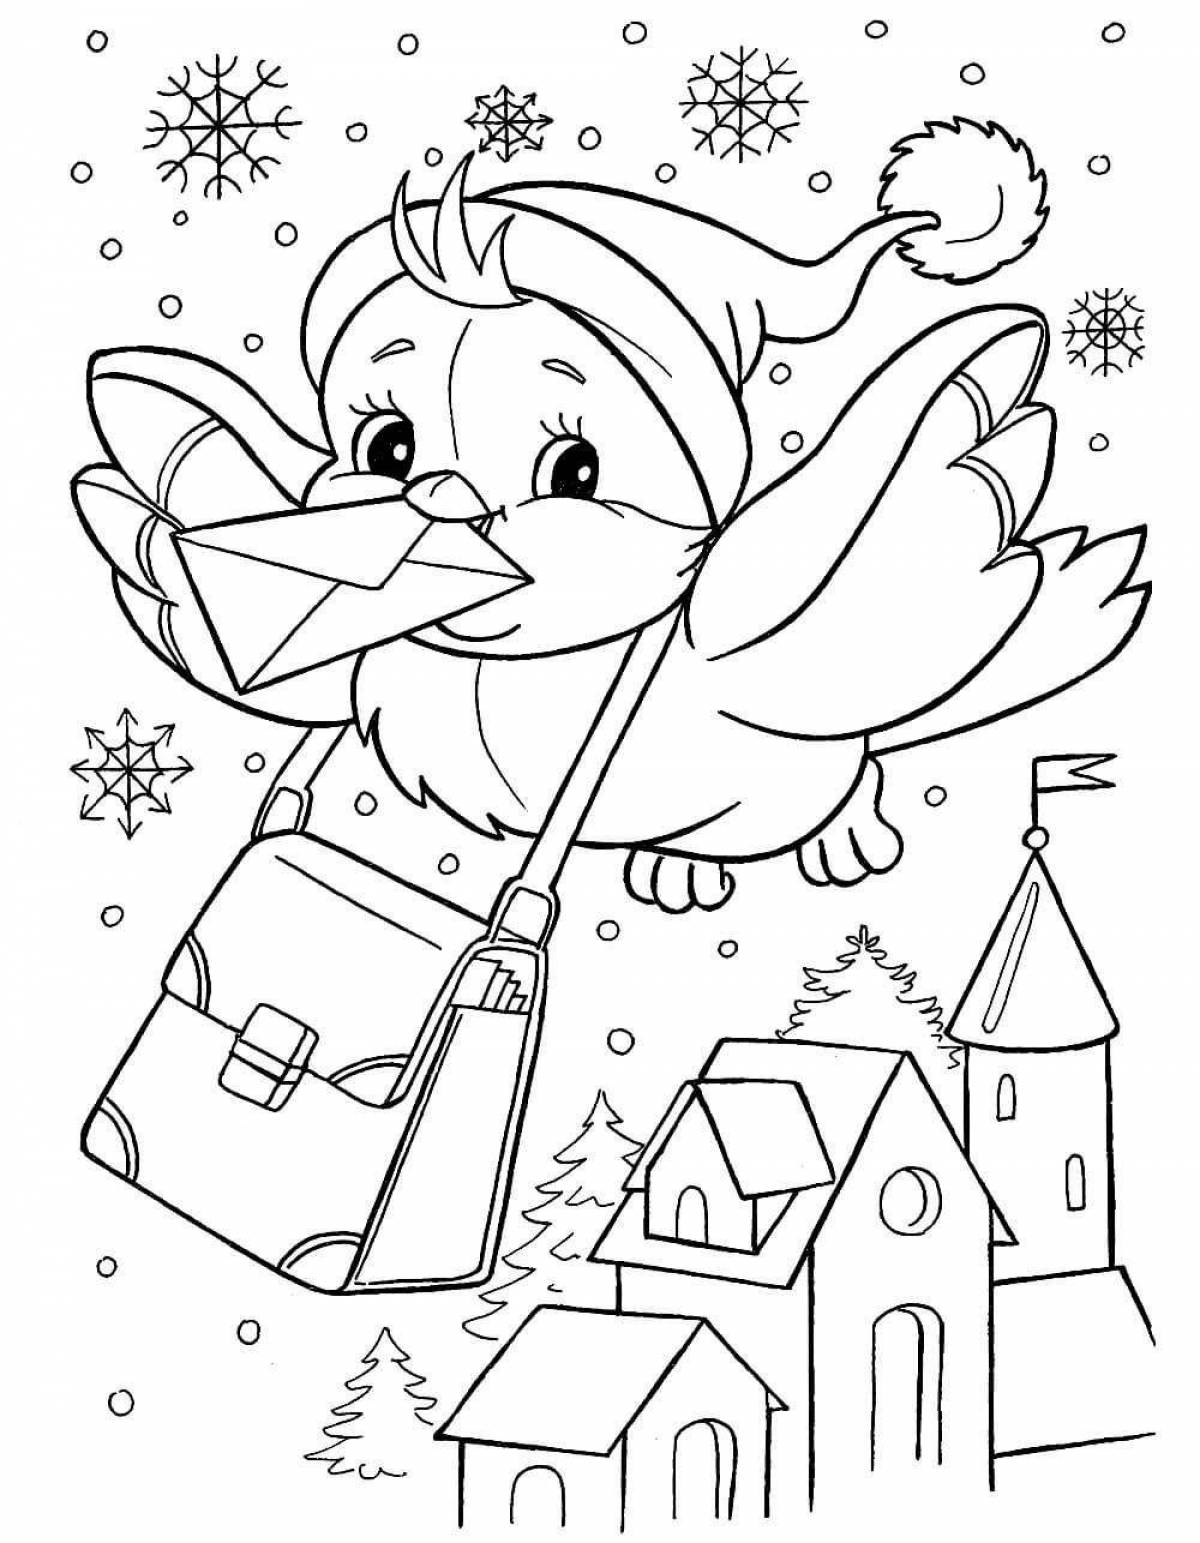 Colorful winter coloring book for kids